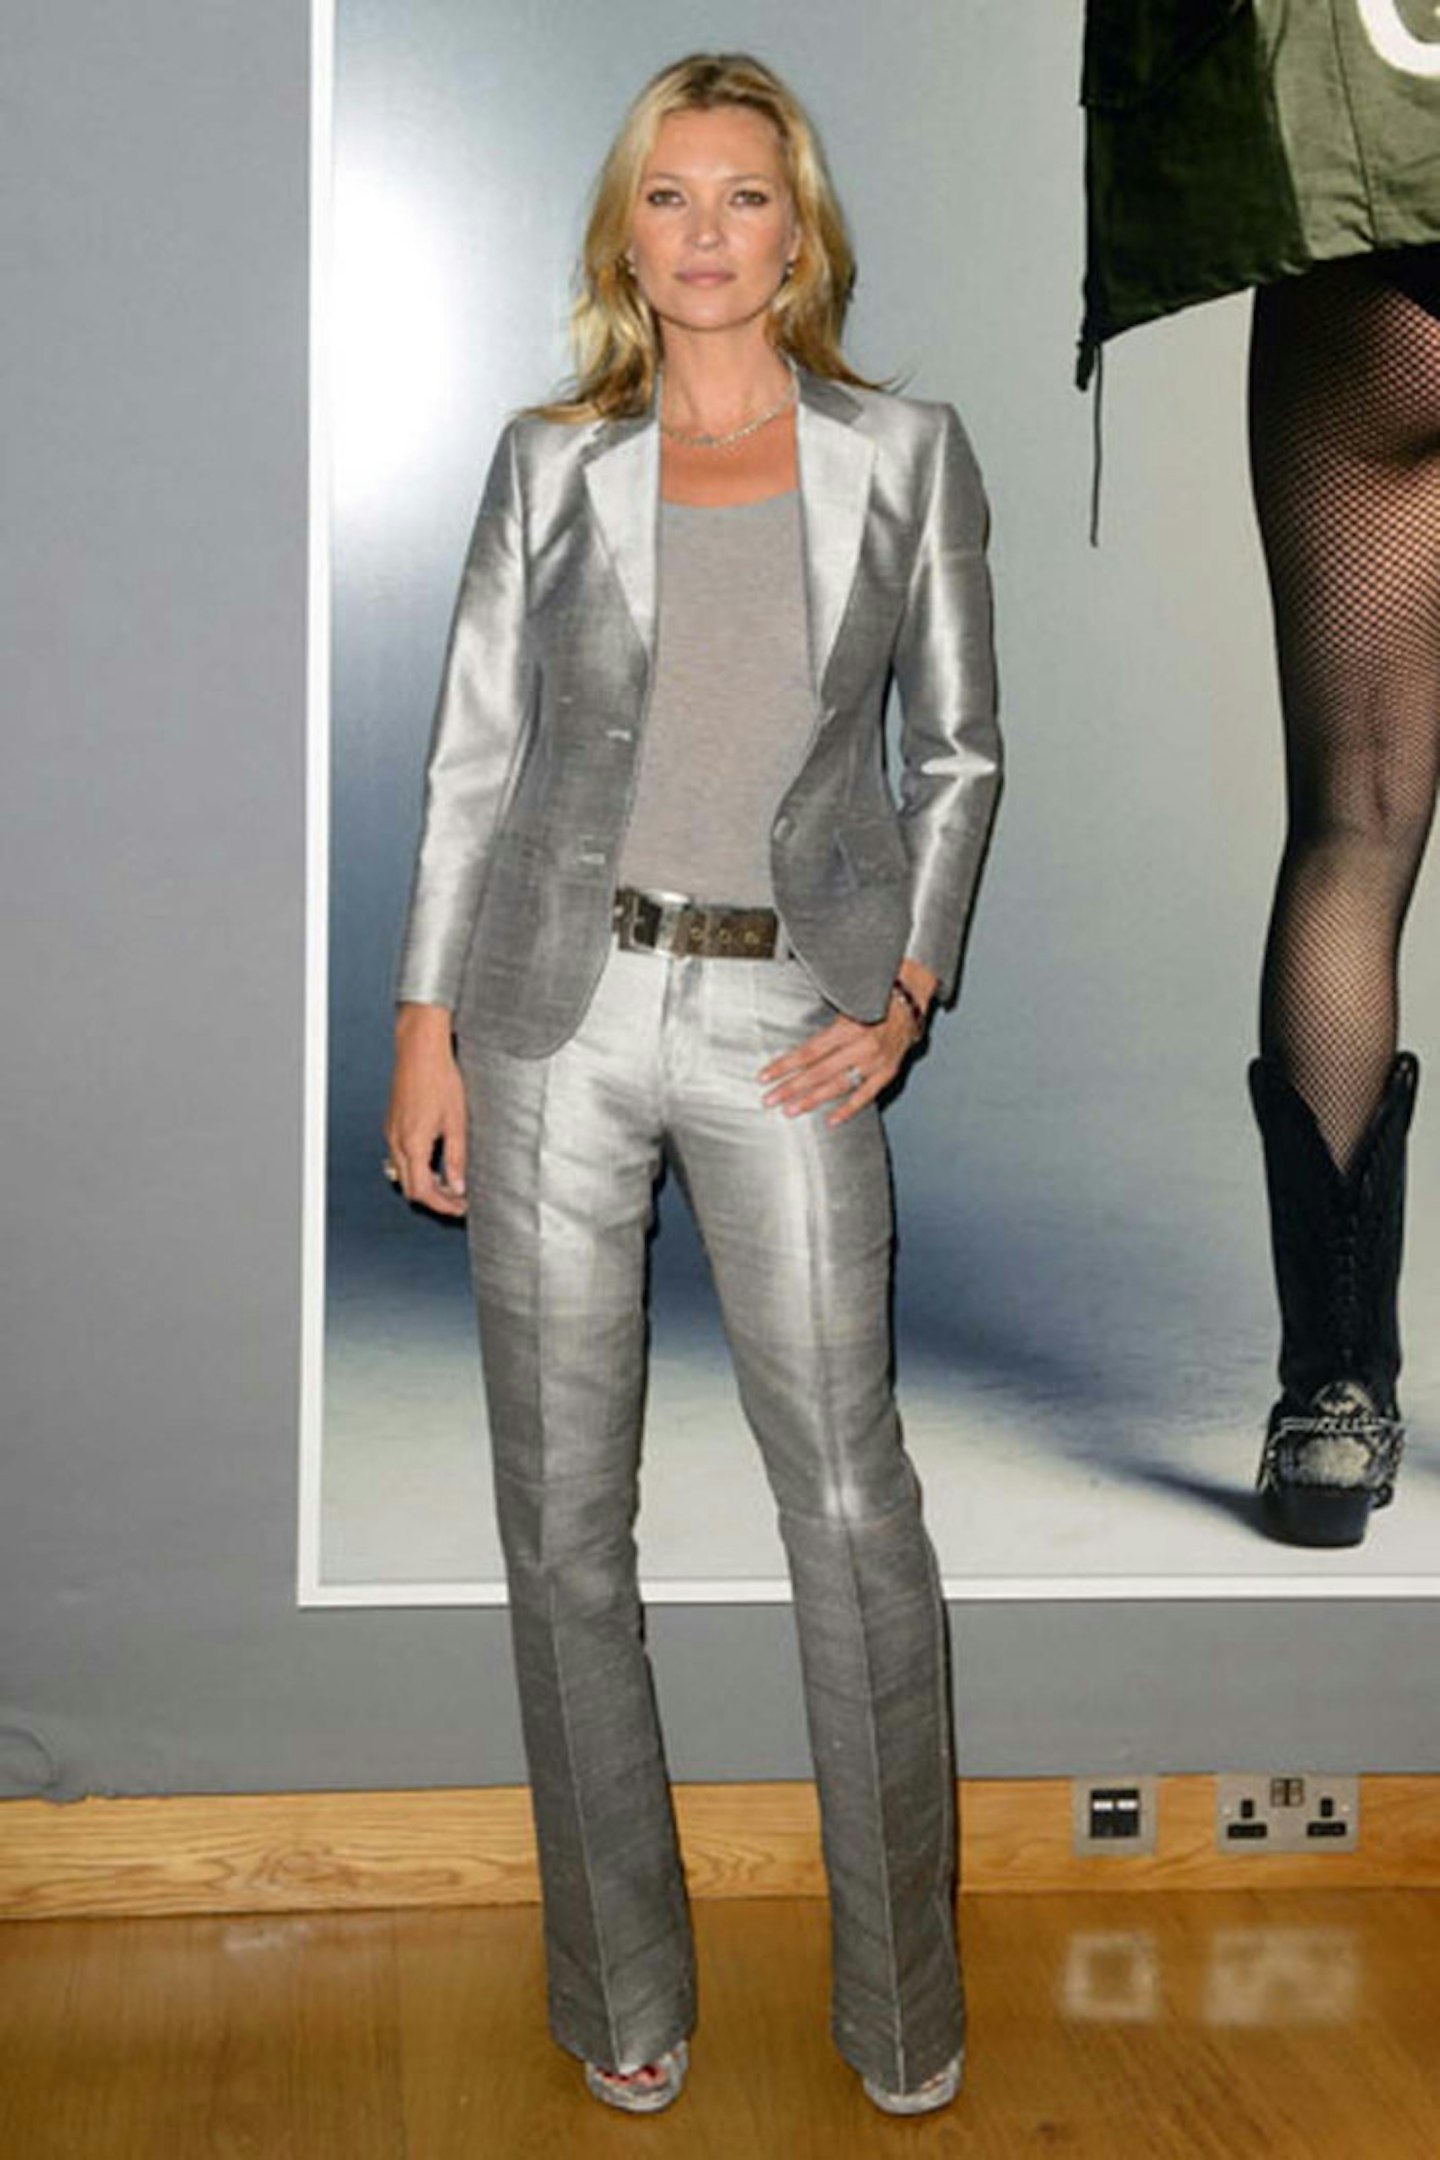 Kate Moss at Kate Moss The Collection Photocall in London, 4 September 2013